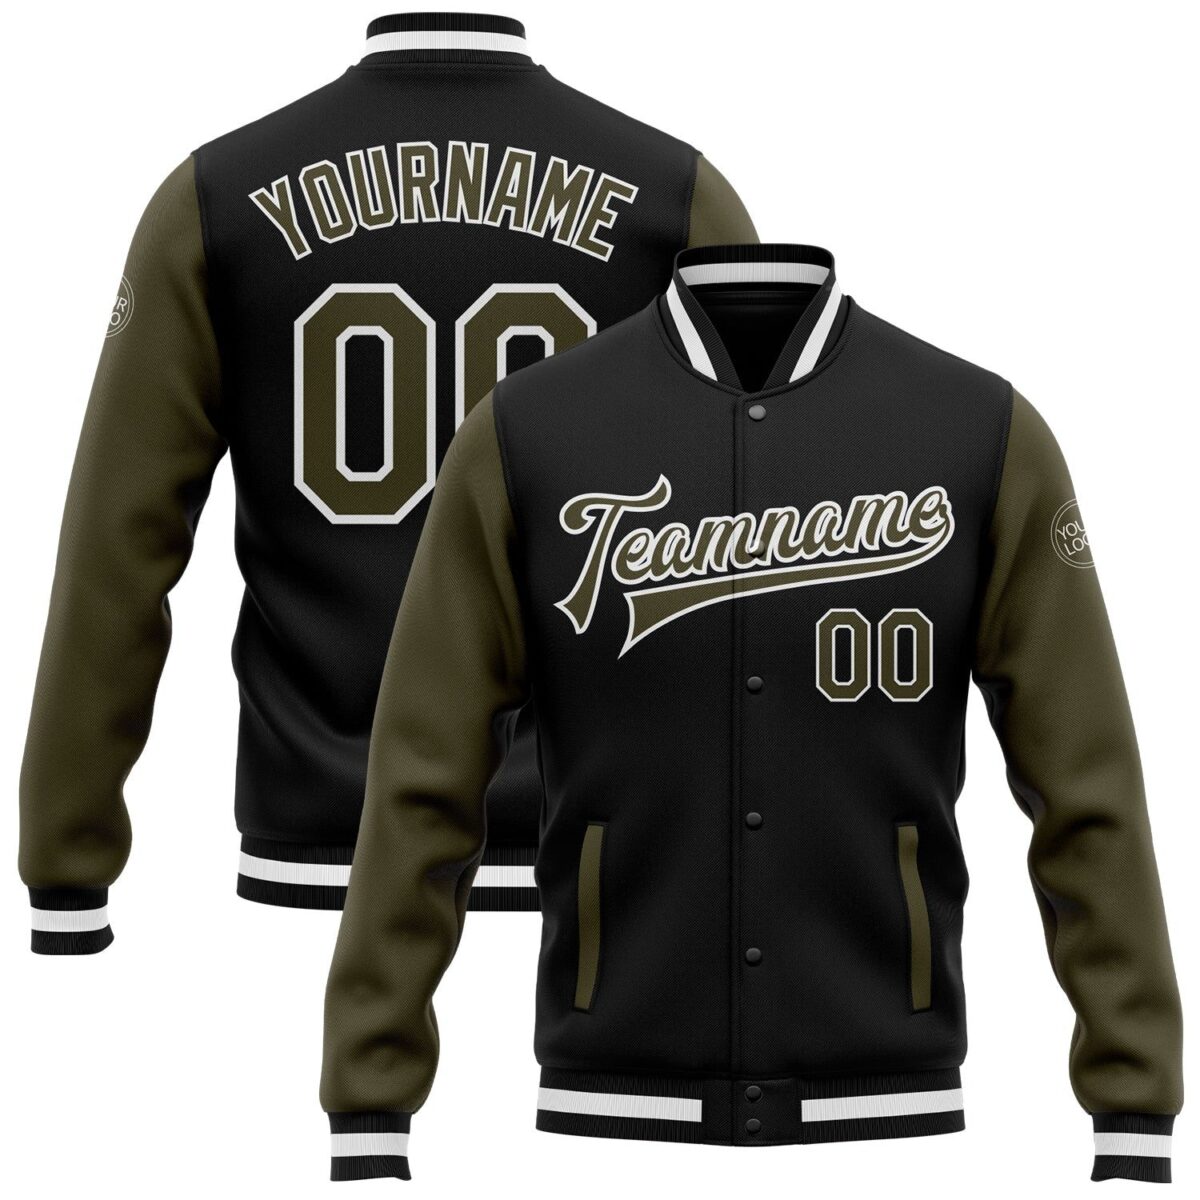 Baseball College Student Jackets with Black white 1